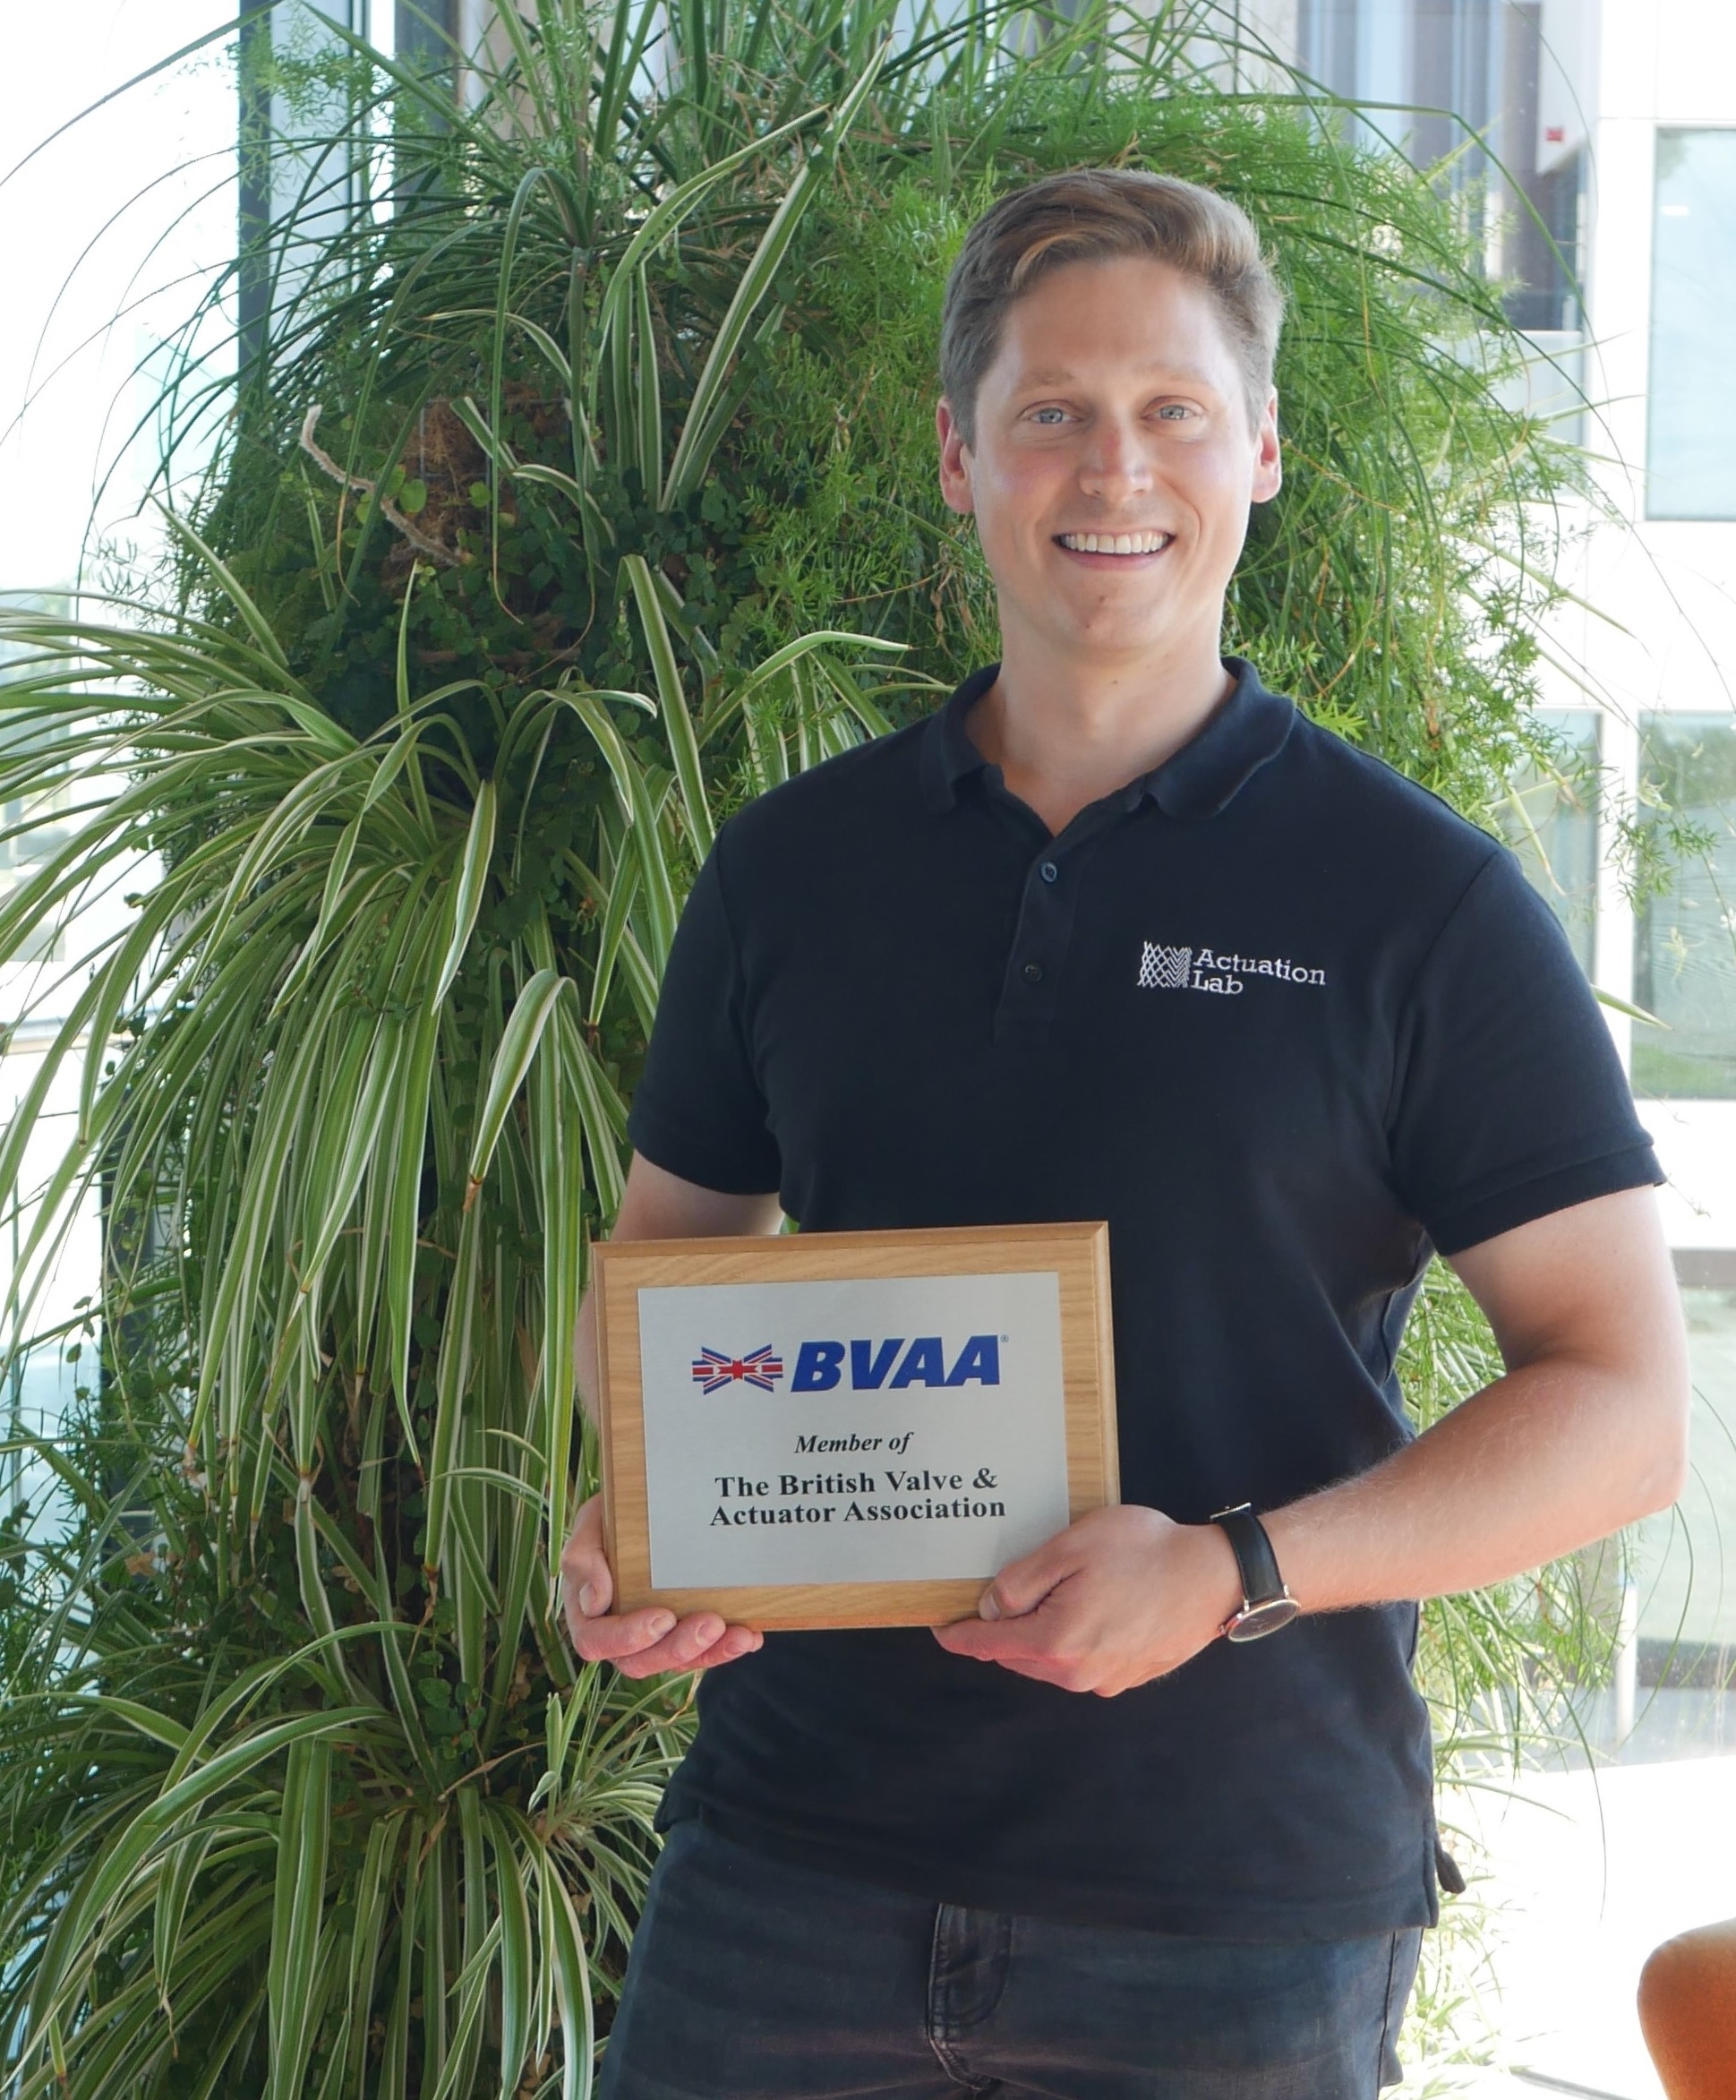 CEO Simon Bates with Actuation Lab's BVAA membership plaque